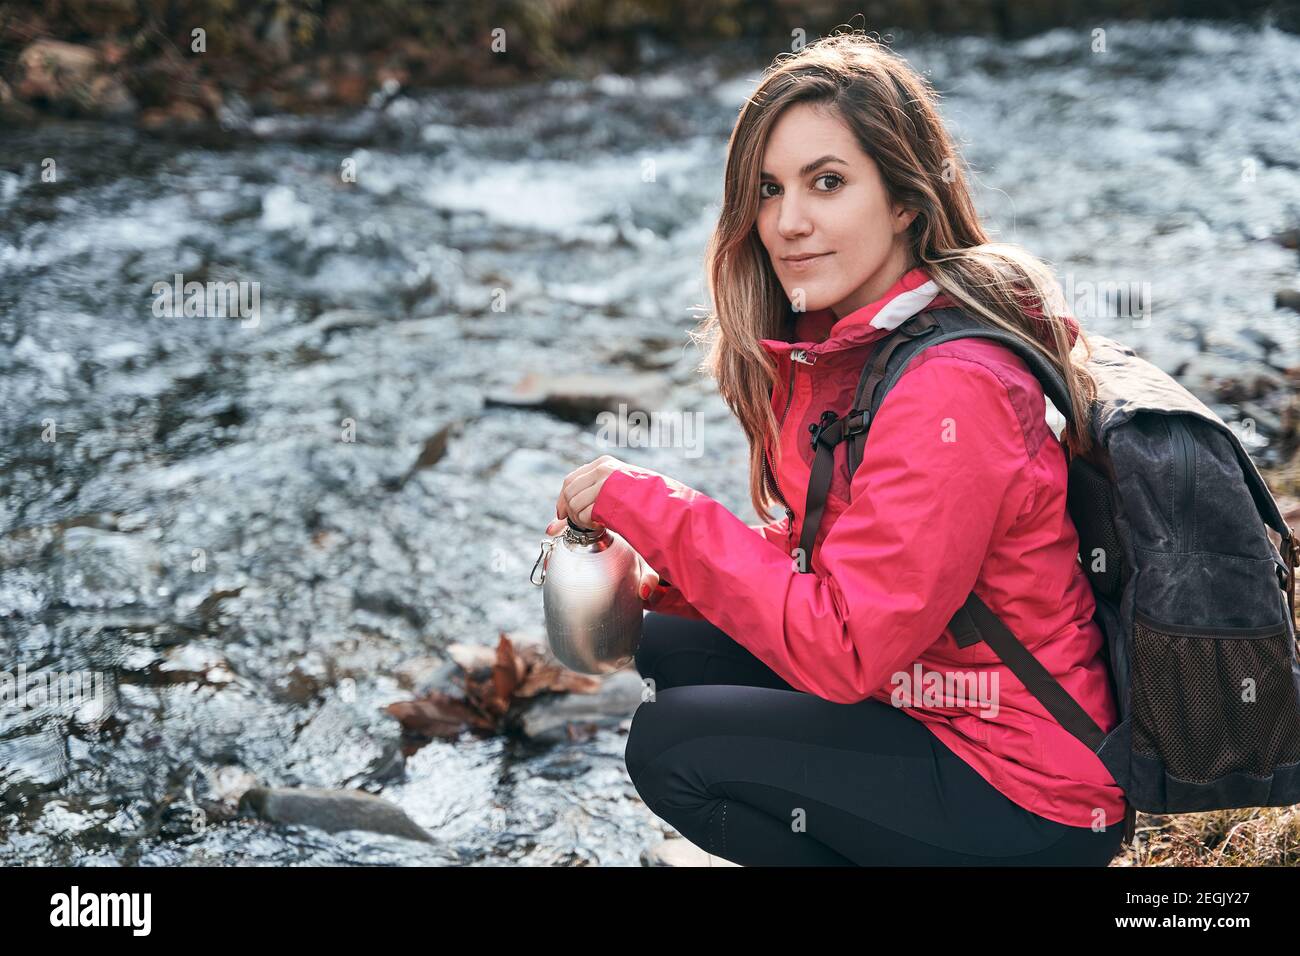 girl scout on the river bank with a canteen of water Stock Photo